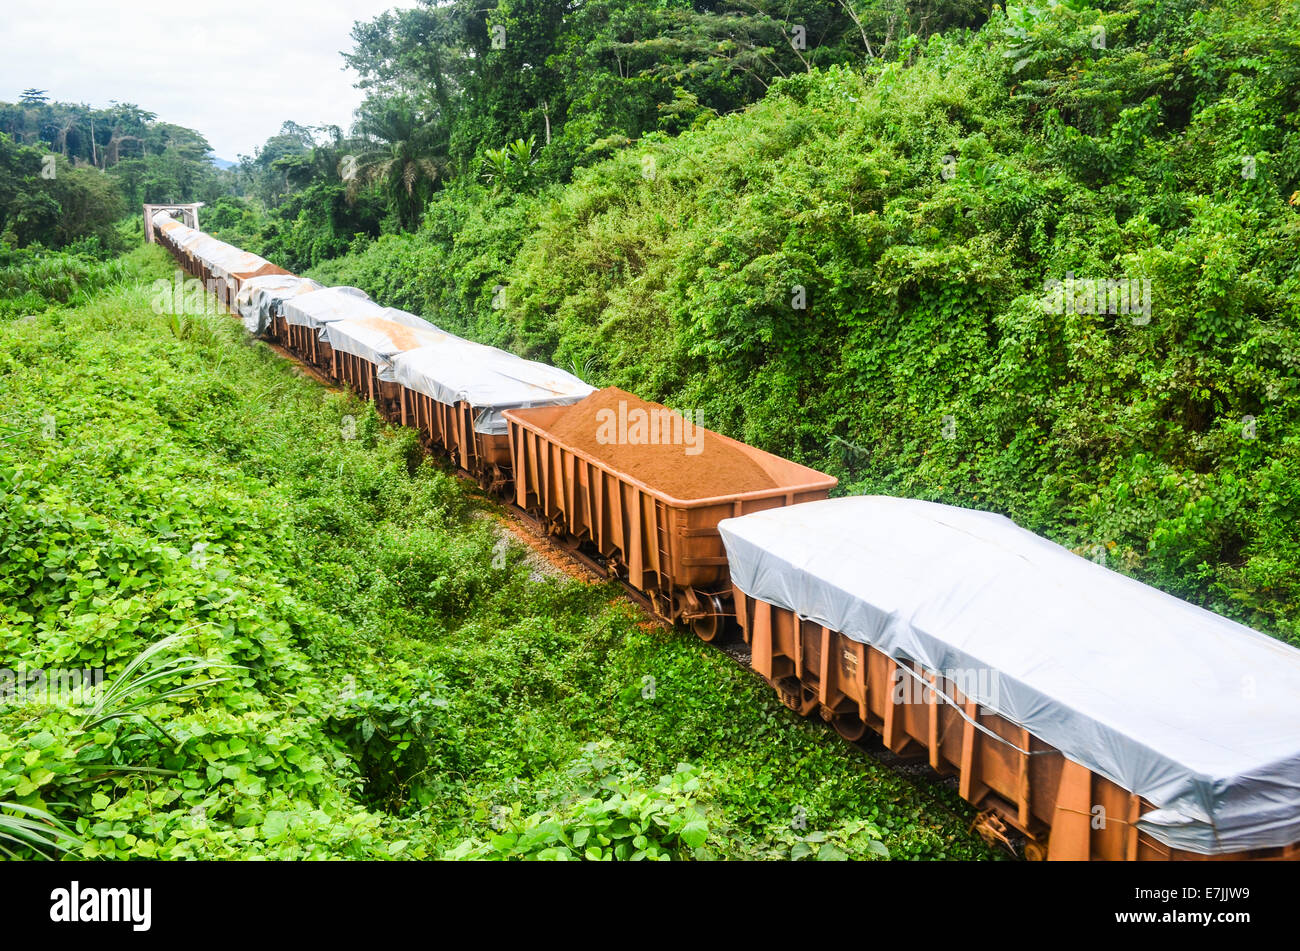 A freight train from ArcelorMittal carrying iron ore from the Nimba deposit to the port of Buchanan, Liberia Stock Photo